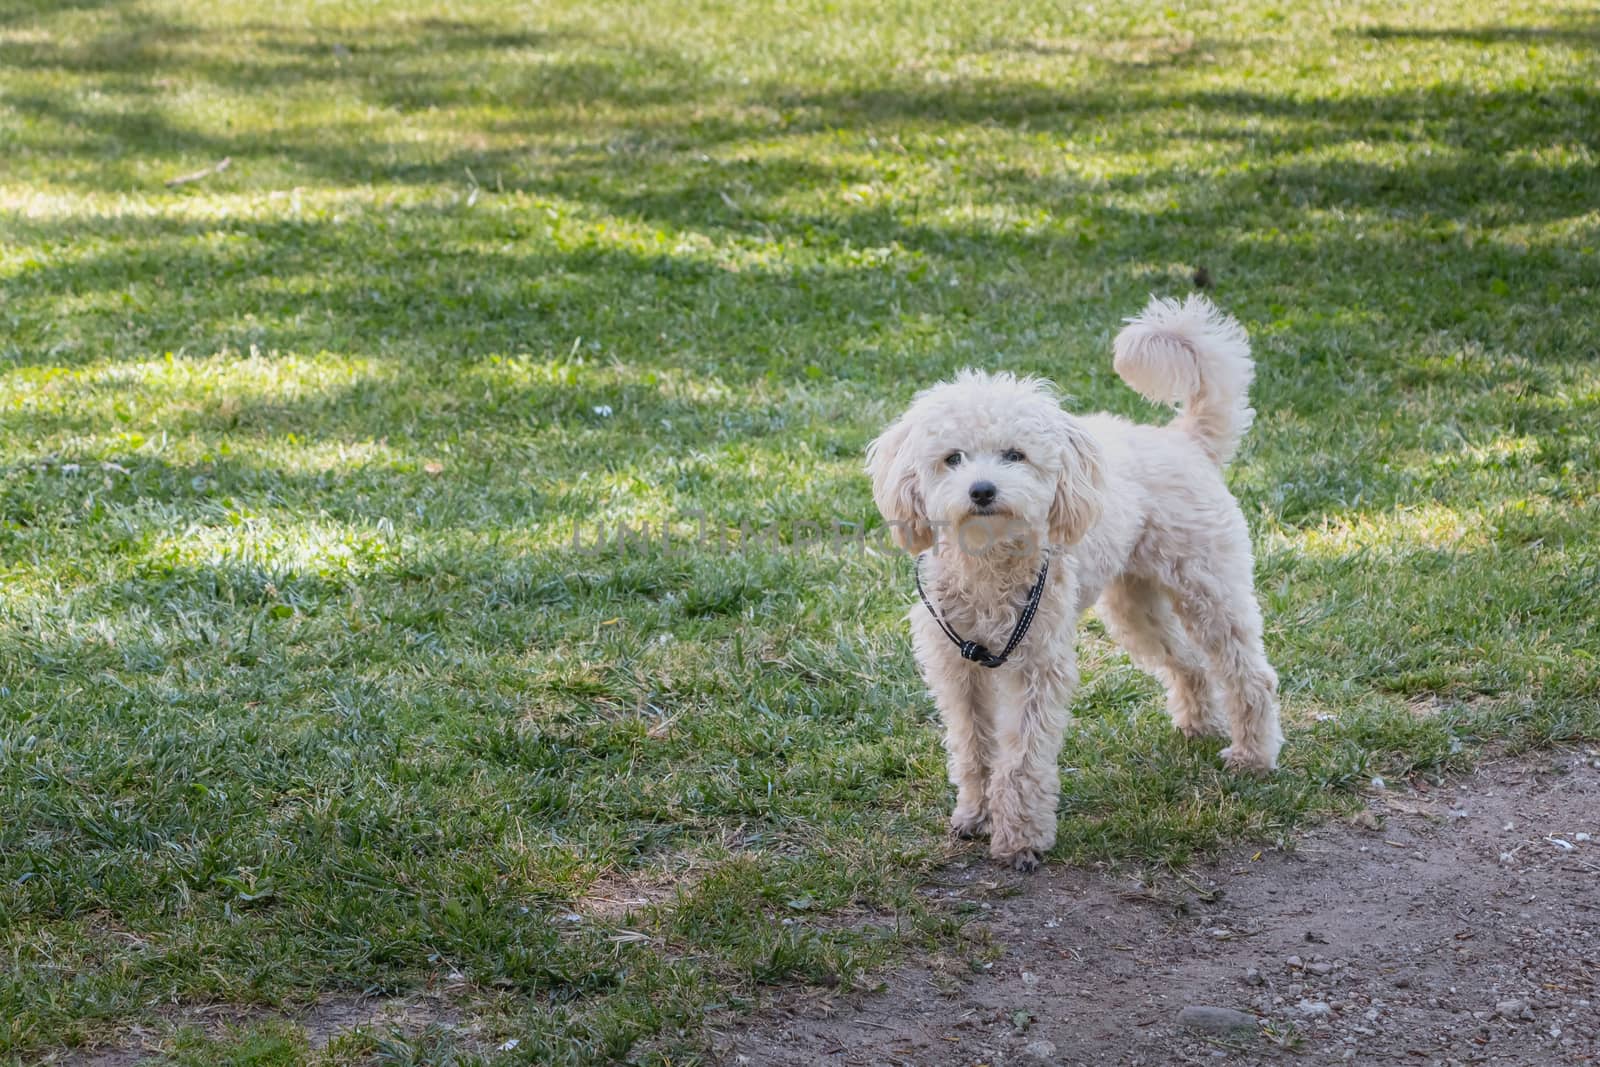 little white poodle dog standing in green grass in Portugal